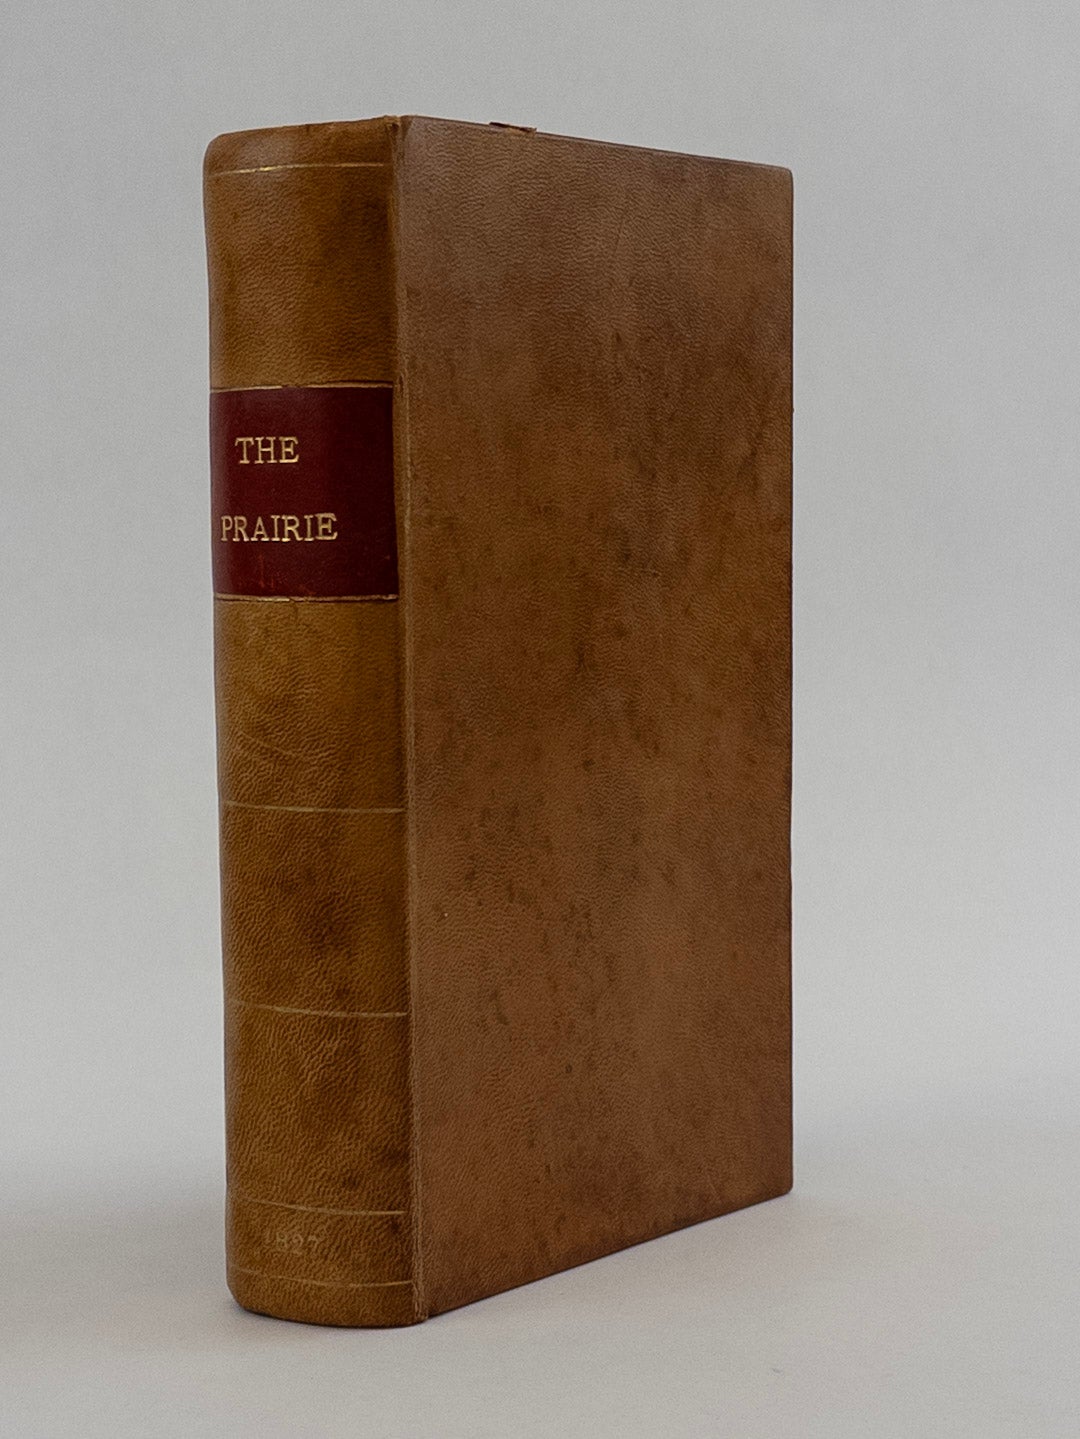 Product Image for THE PRAIRIE [Two Volumes Bound in One]